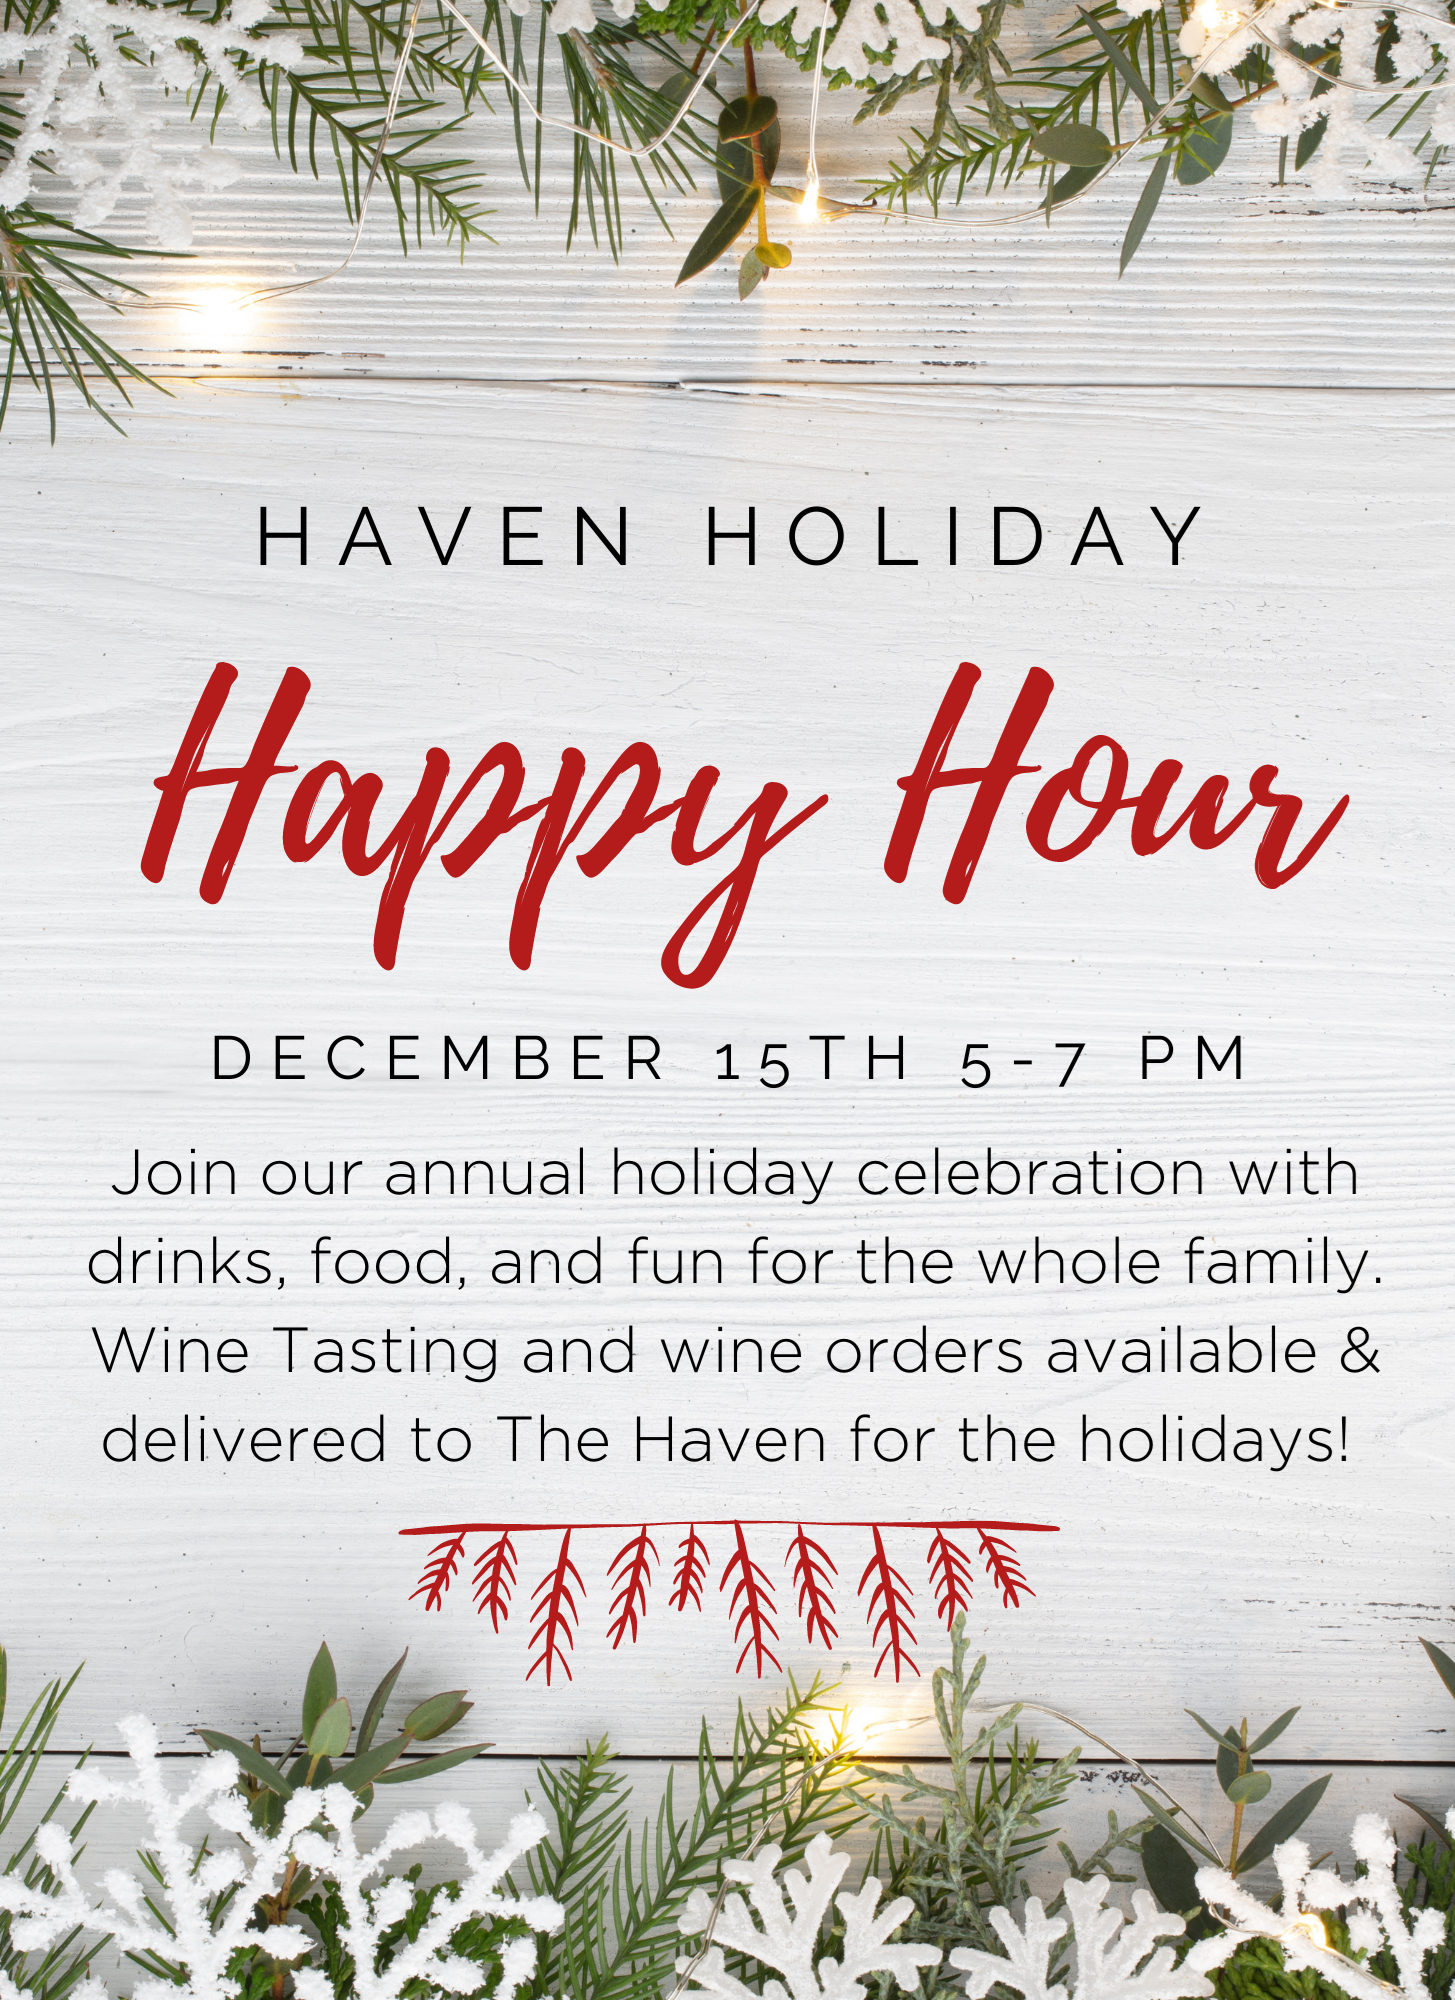 Haven Holiday Happy Hour